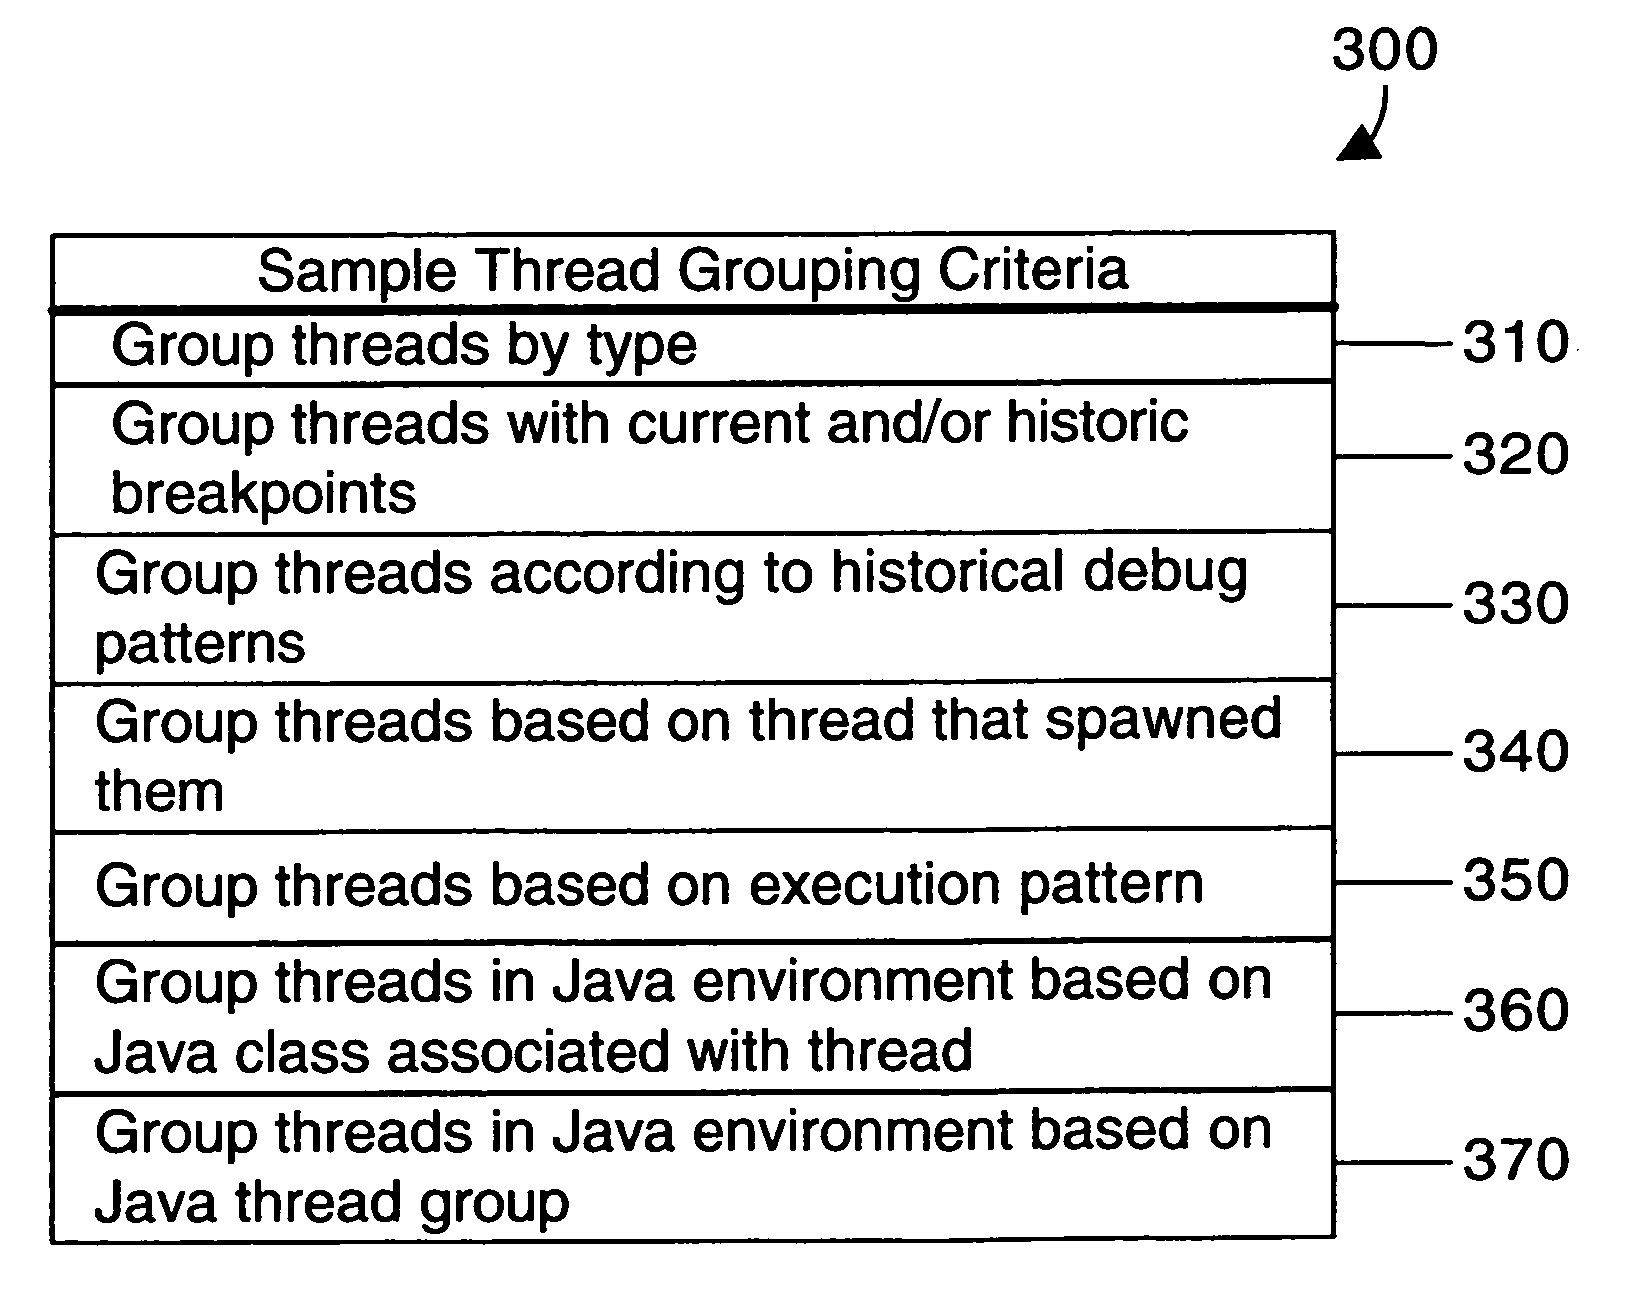 Grouping threads in a debugger display